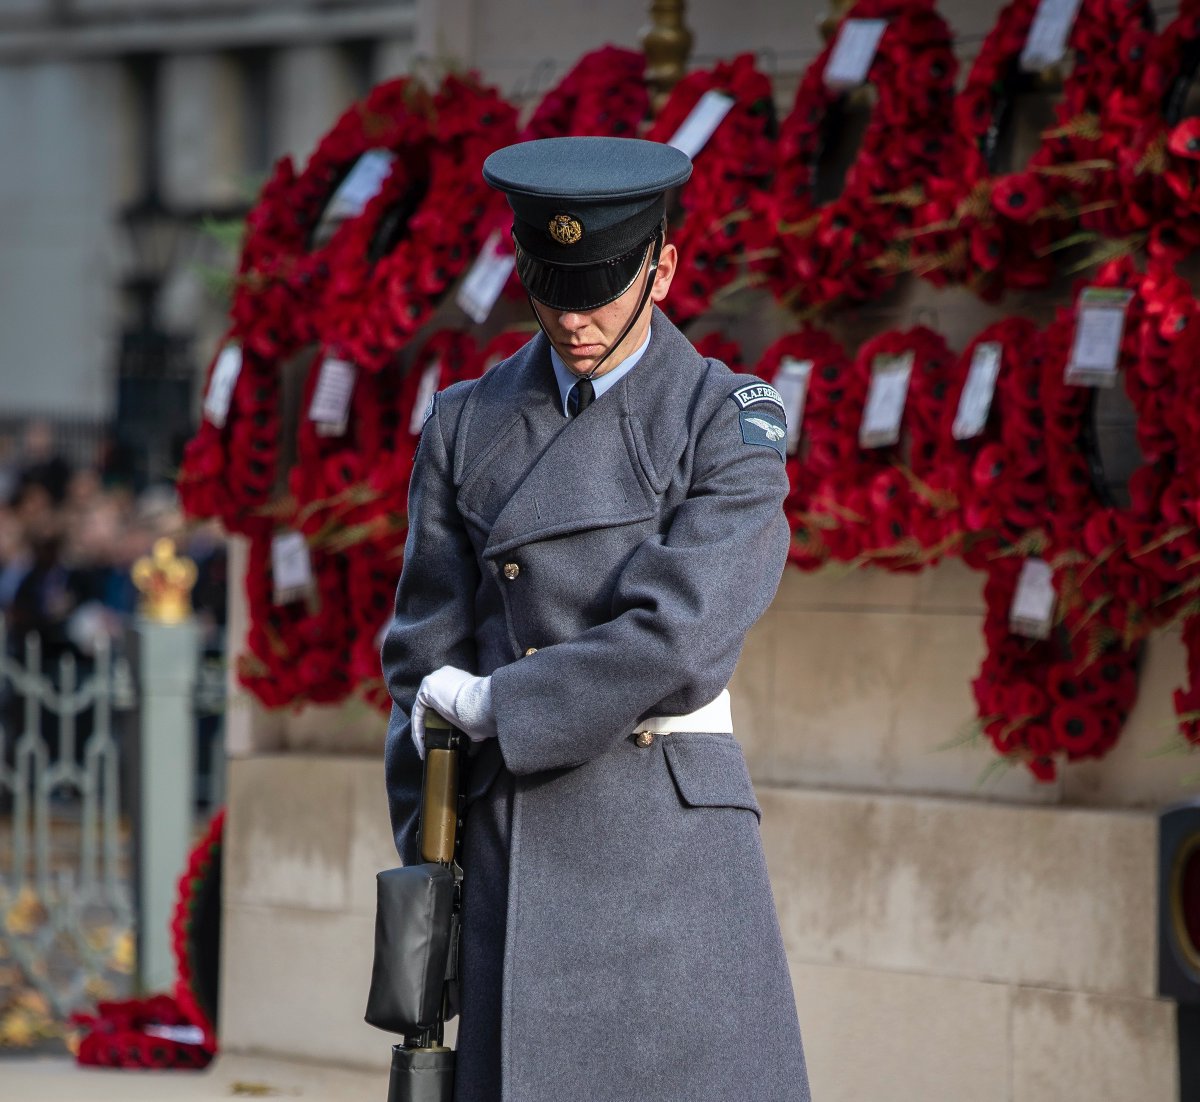 At 11am today we will observe a #twominutesilence to remember those who made the ultimate sacrifice. 

We will remember them. 

#ArmisticeDay #Remembrance #LestWeForget